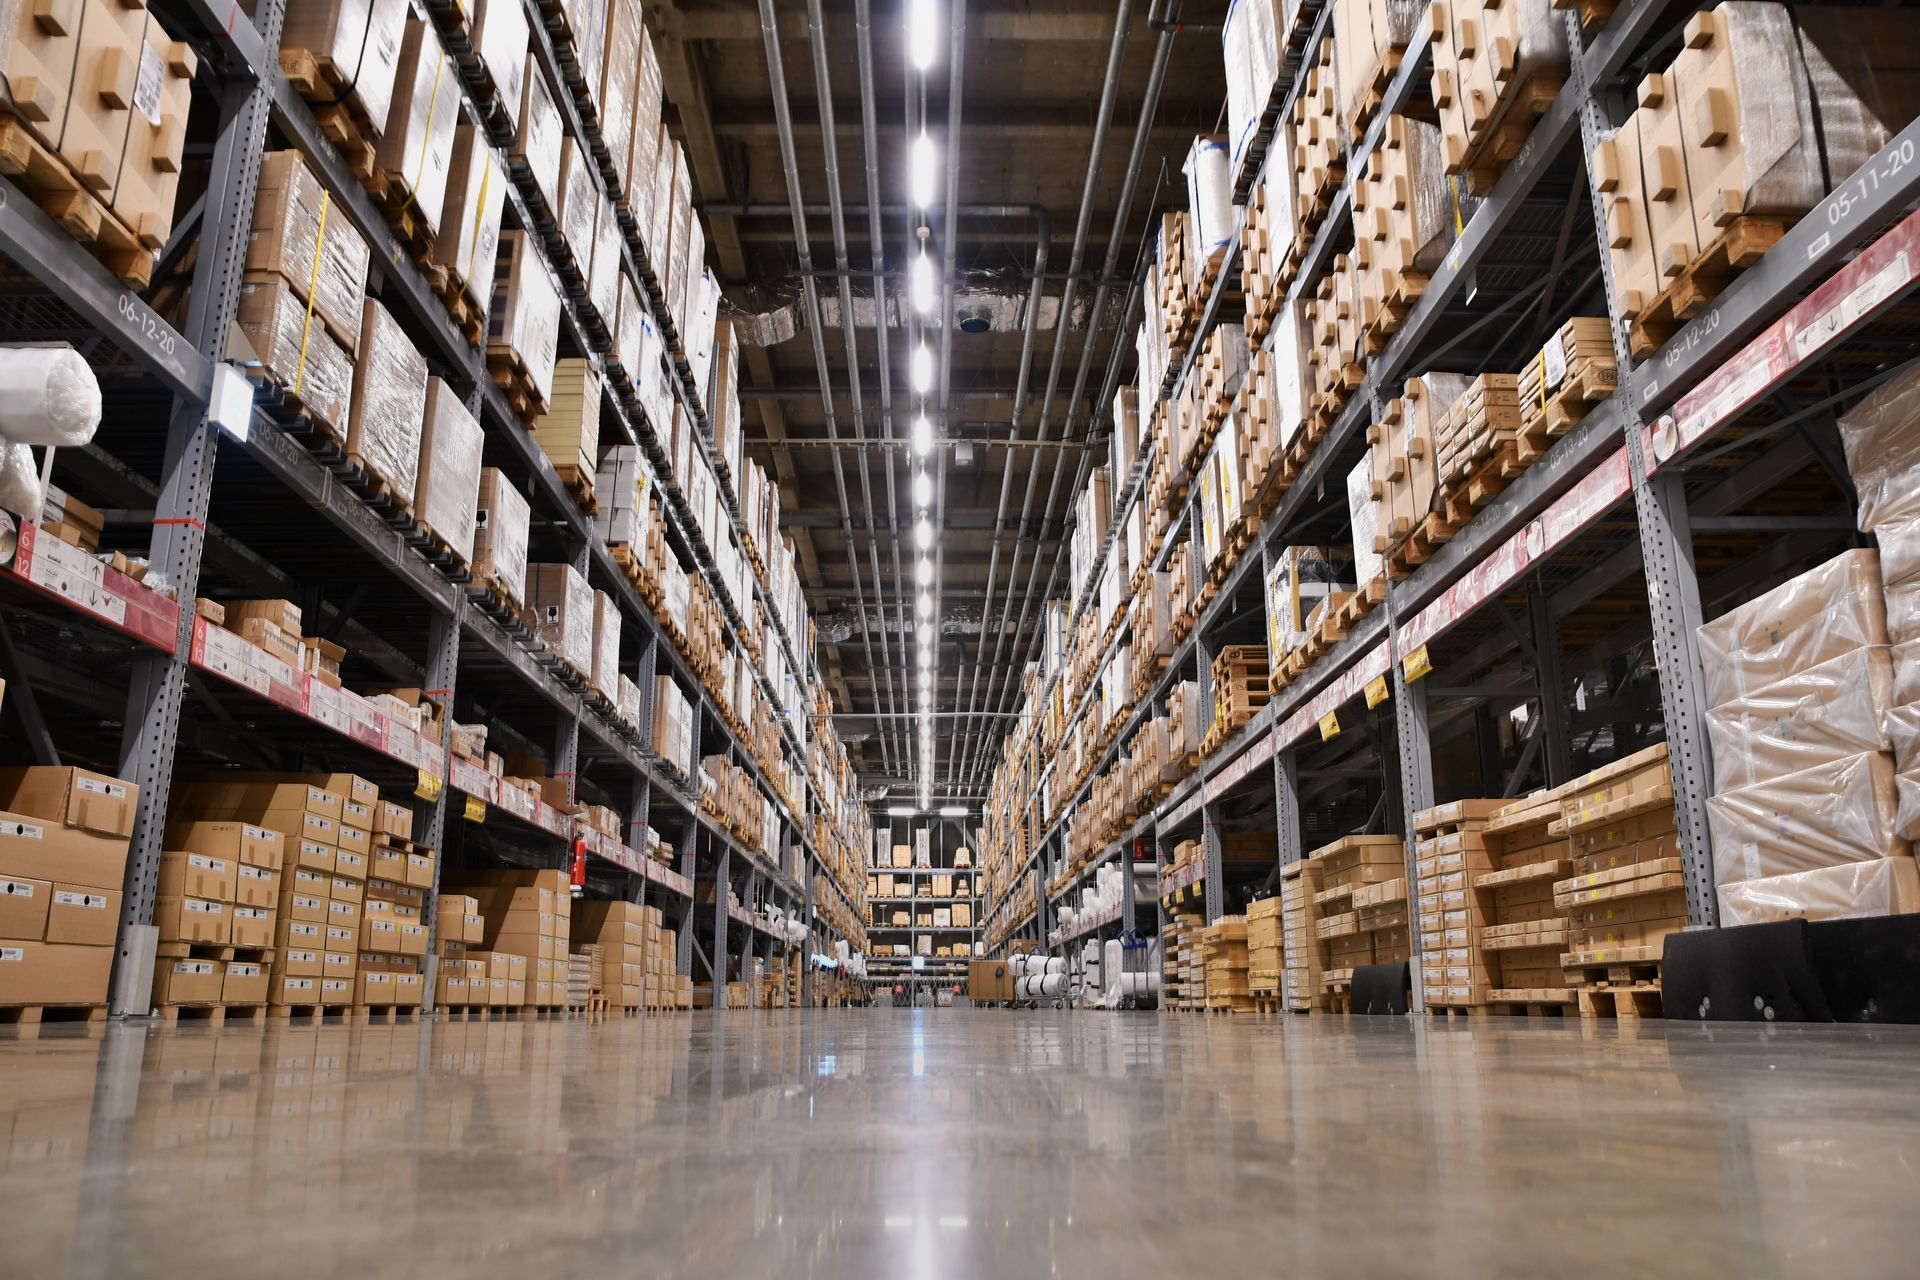 A large warehouse filled with lots of boxes and shelves.